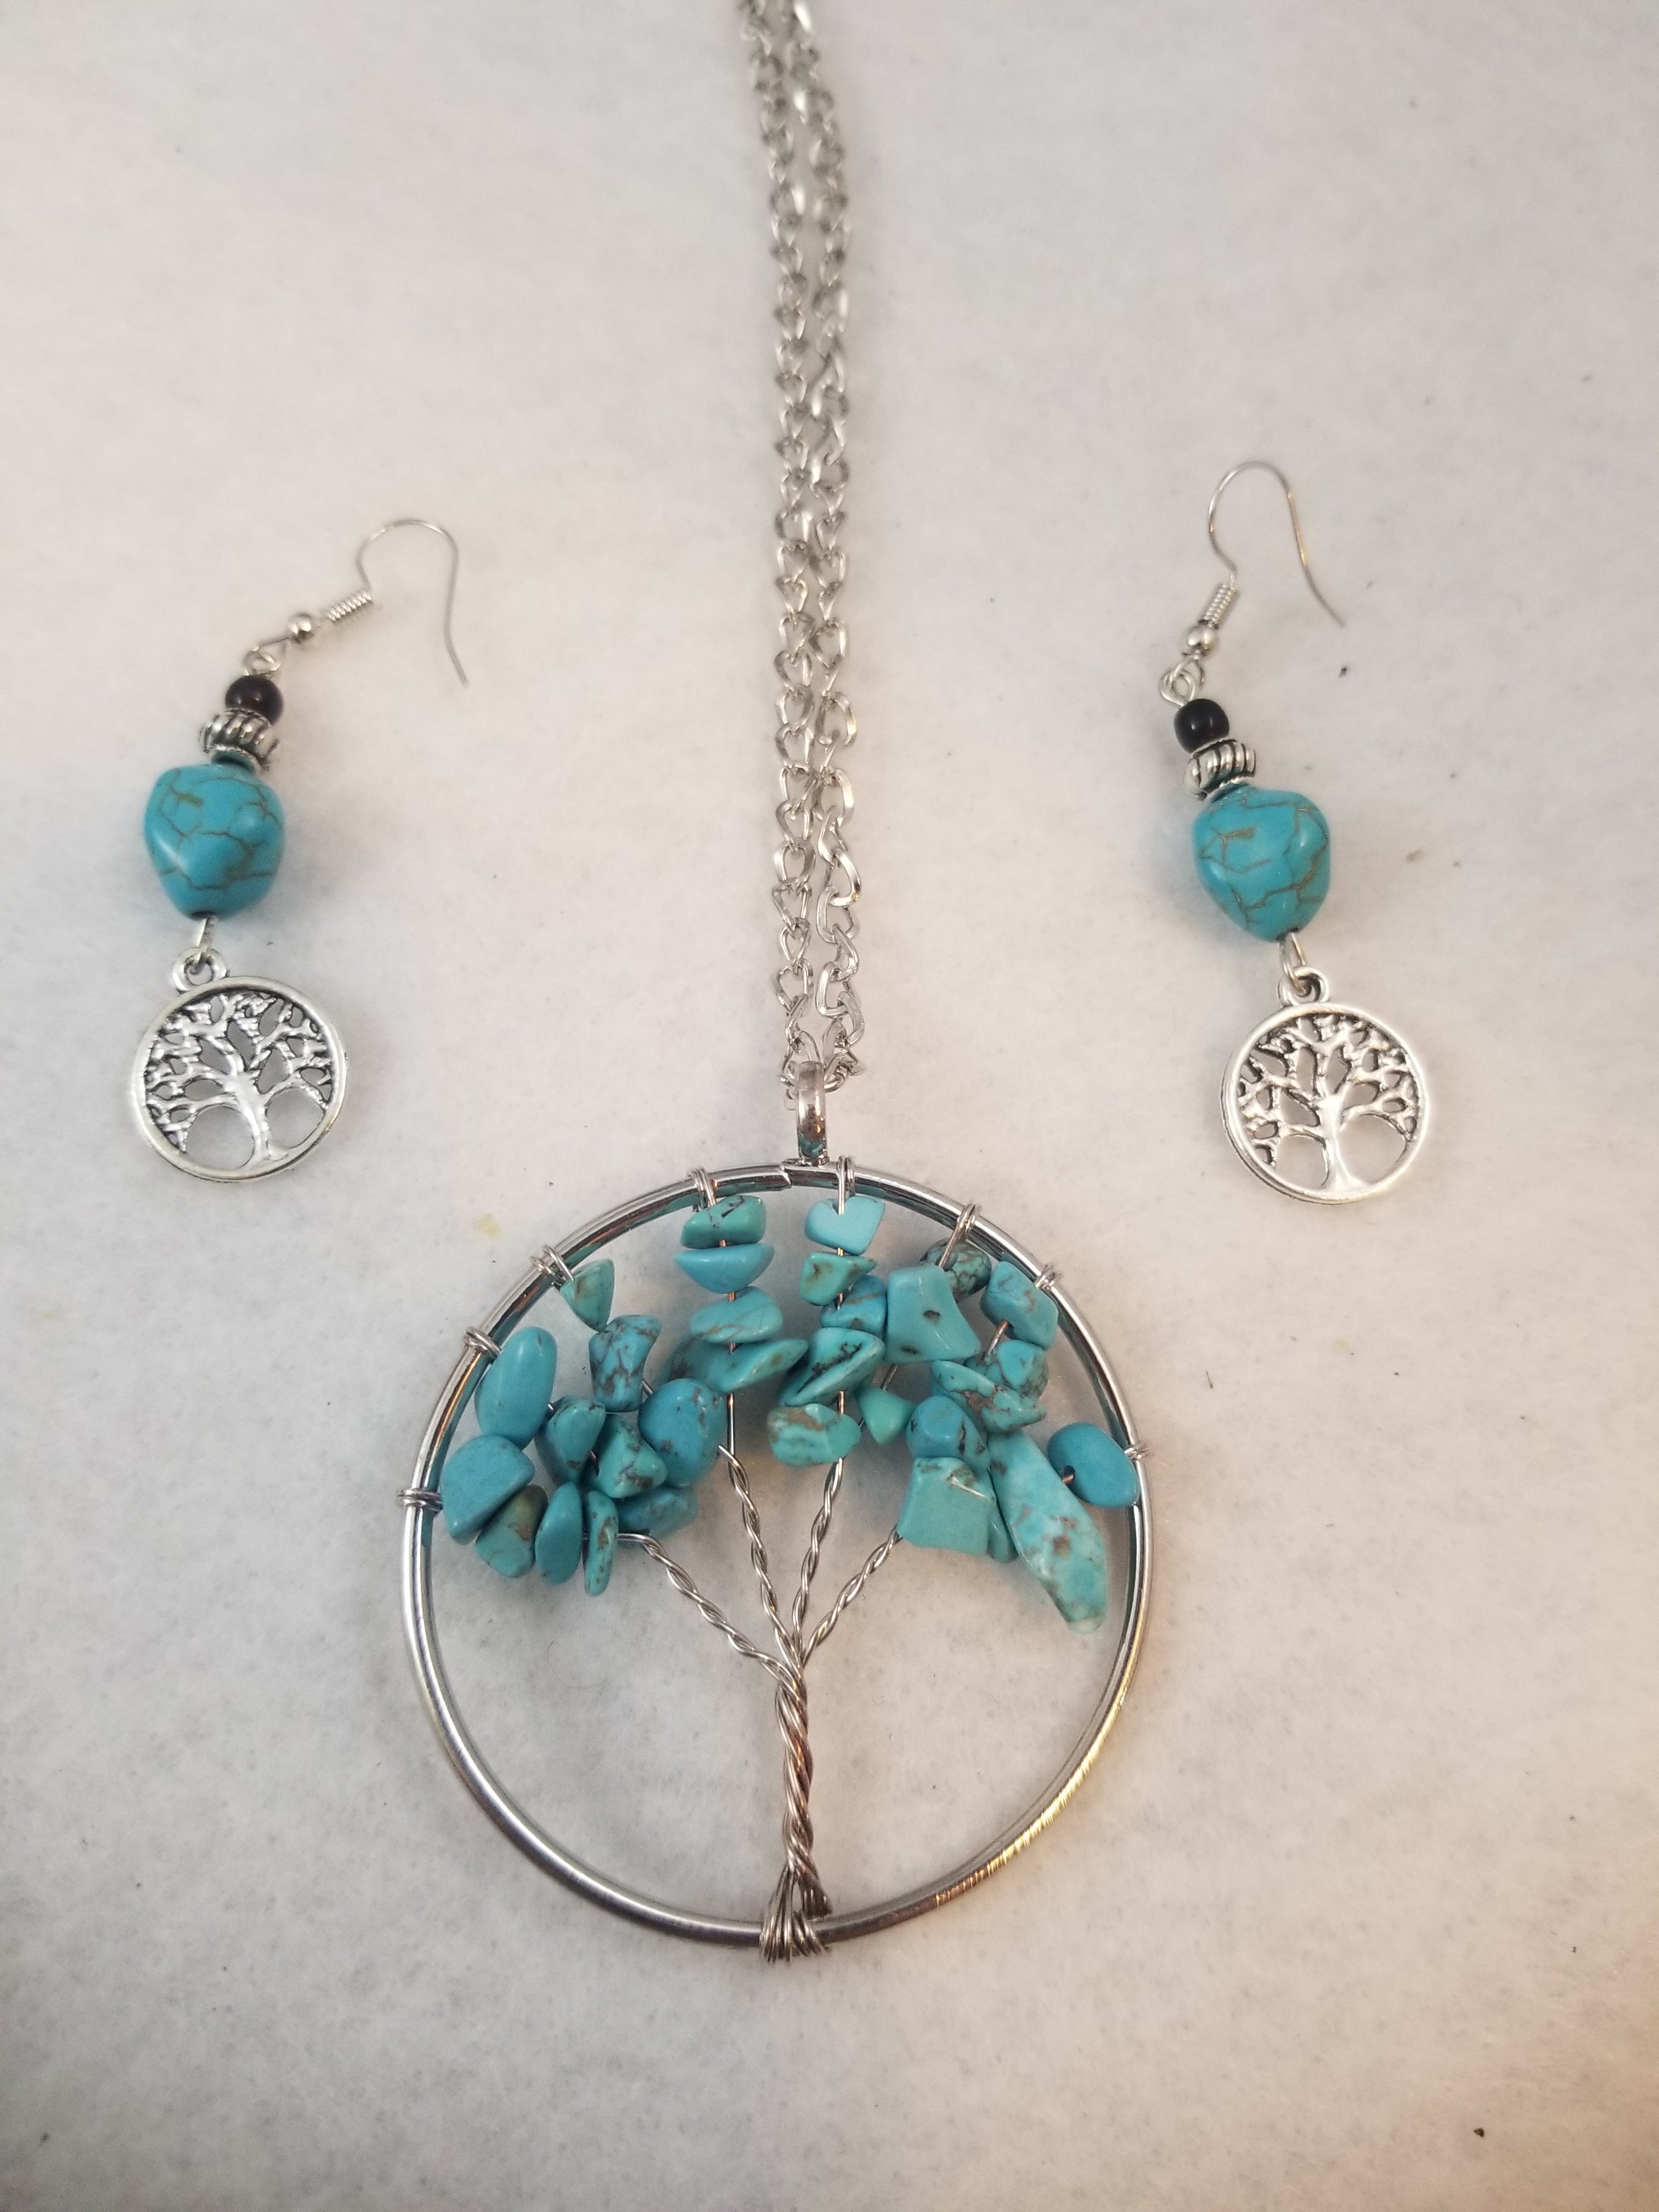 Faux Turquois Tree of Life Necklace with Earrings